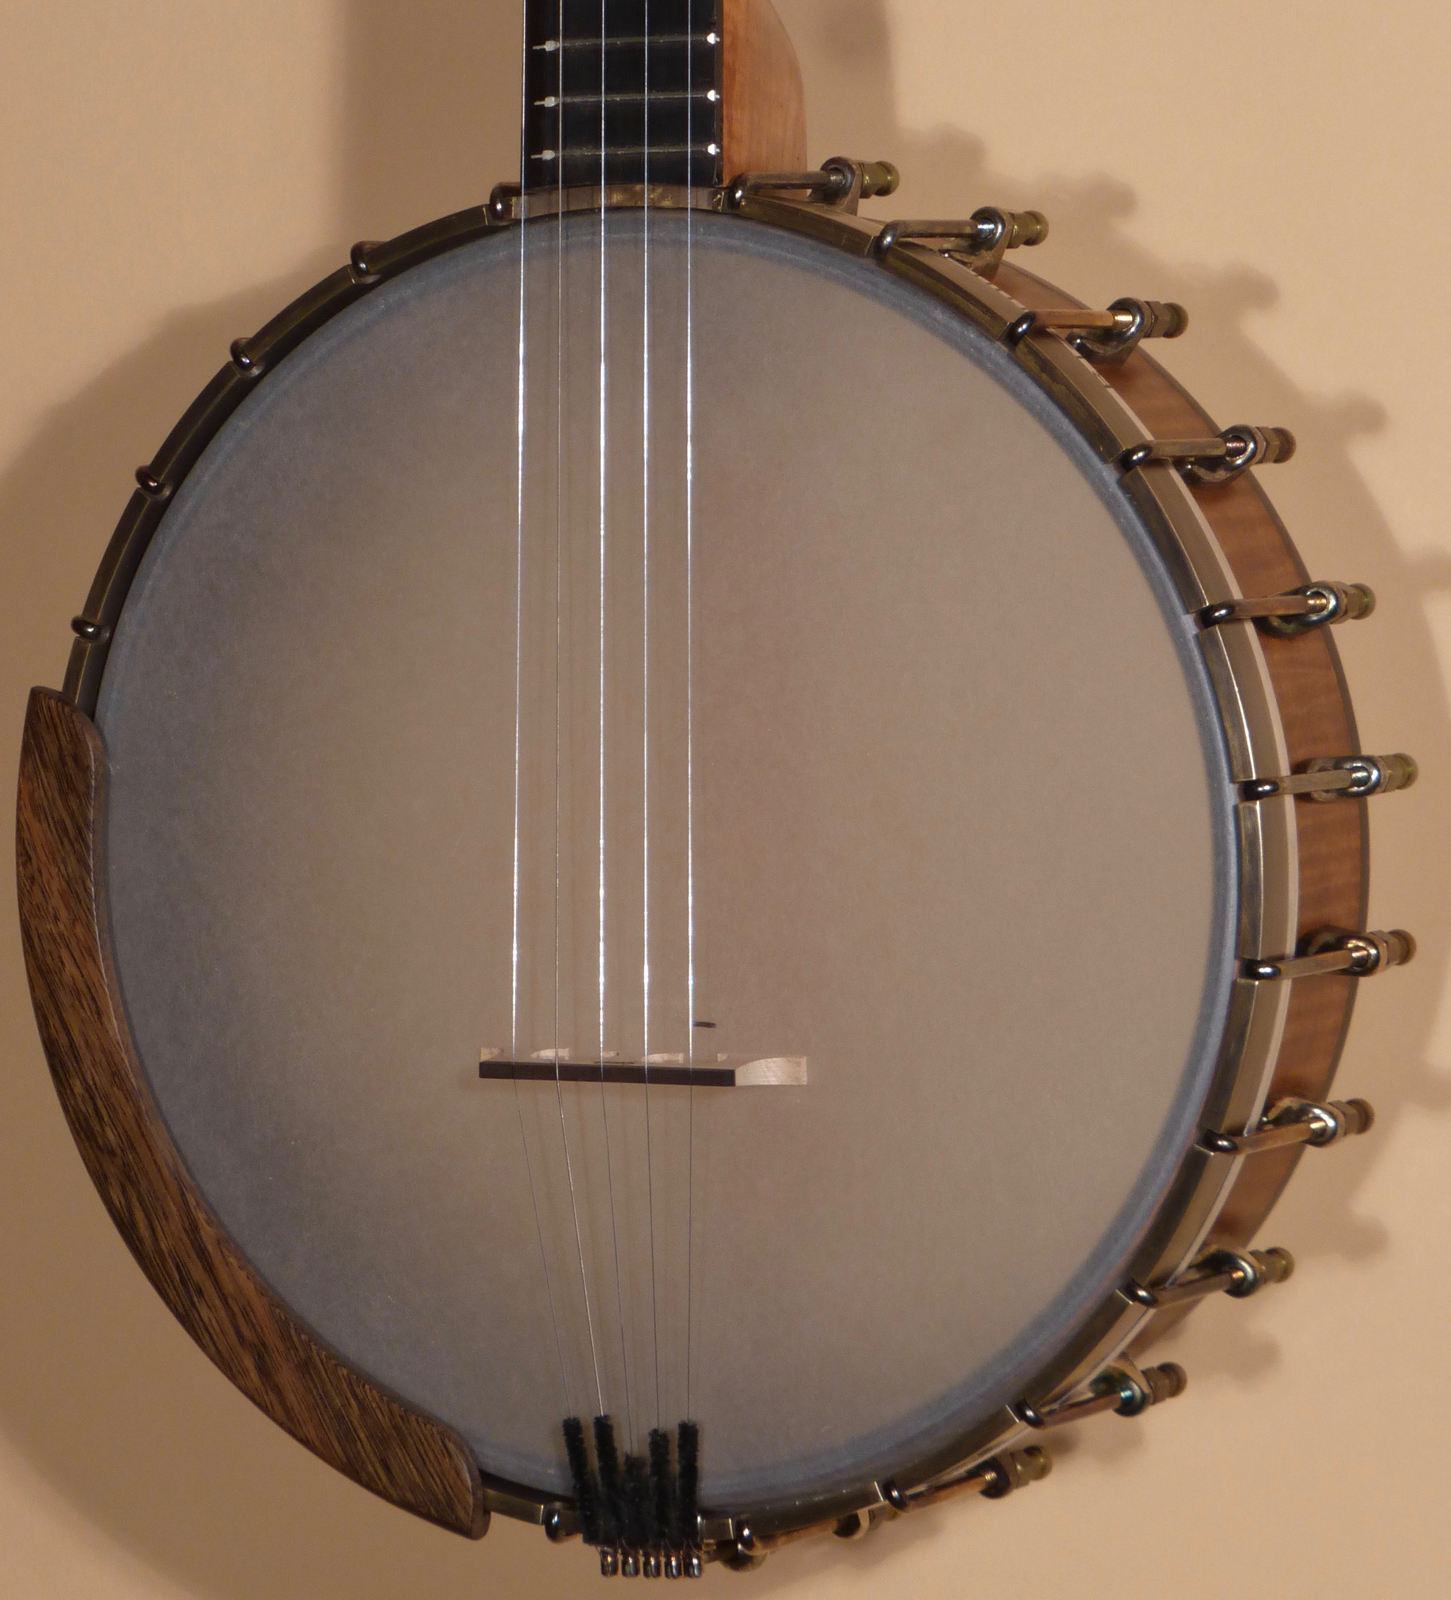 New ODE Curly Maple Special 11″ Open Back Banjo Product